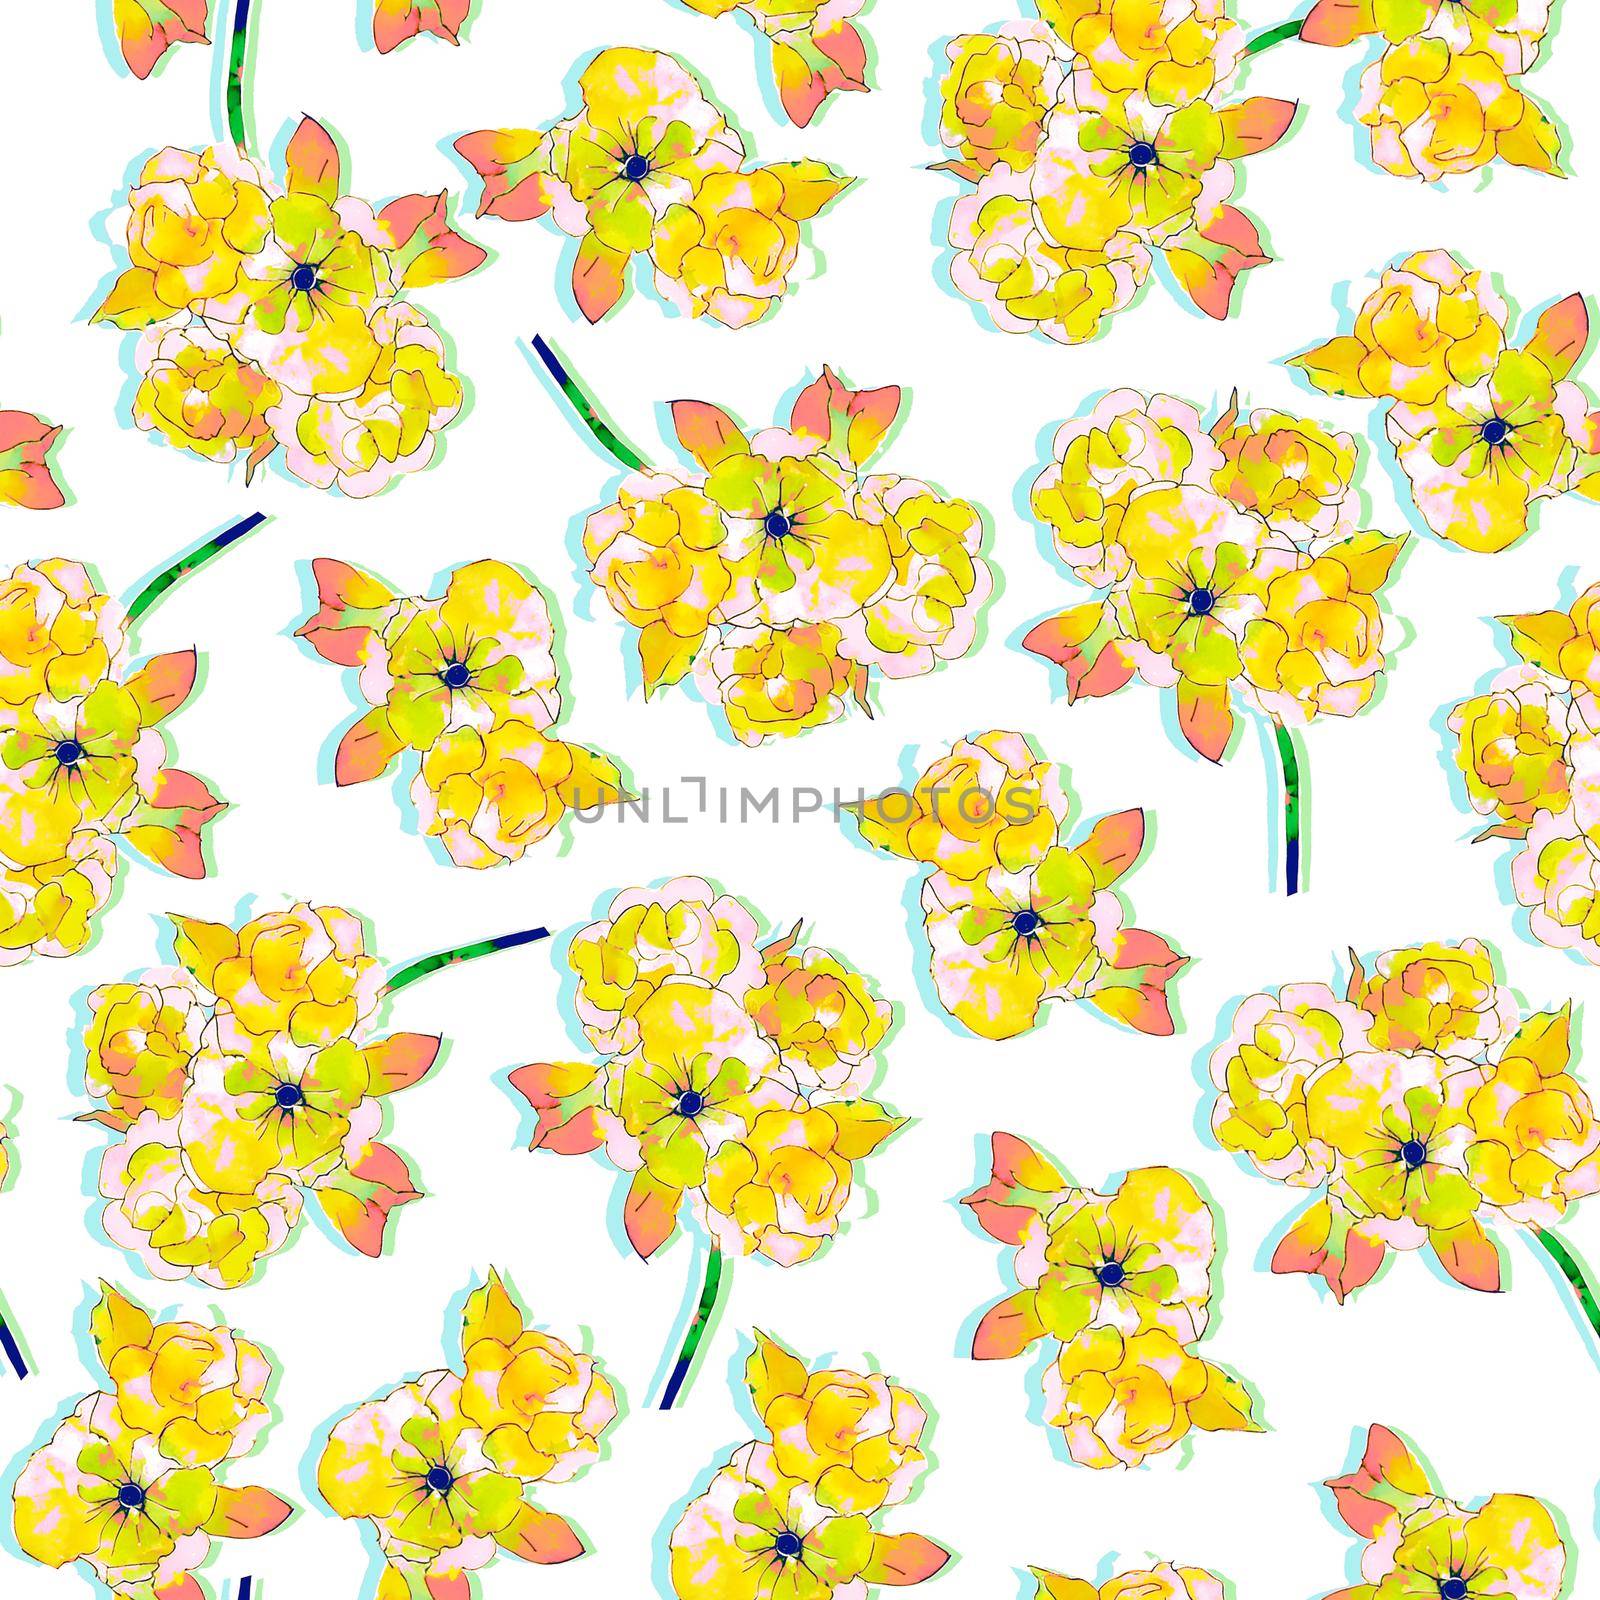 Abstract art background. Beautiful watercolor pattern with yellow flowers watercolor pattern on light background for textile design. Modern background.